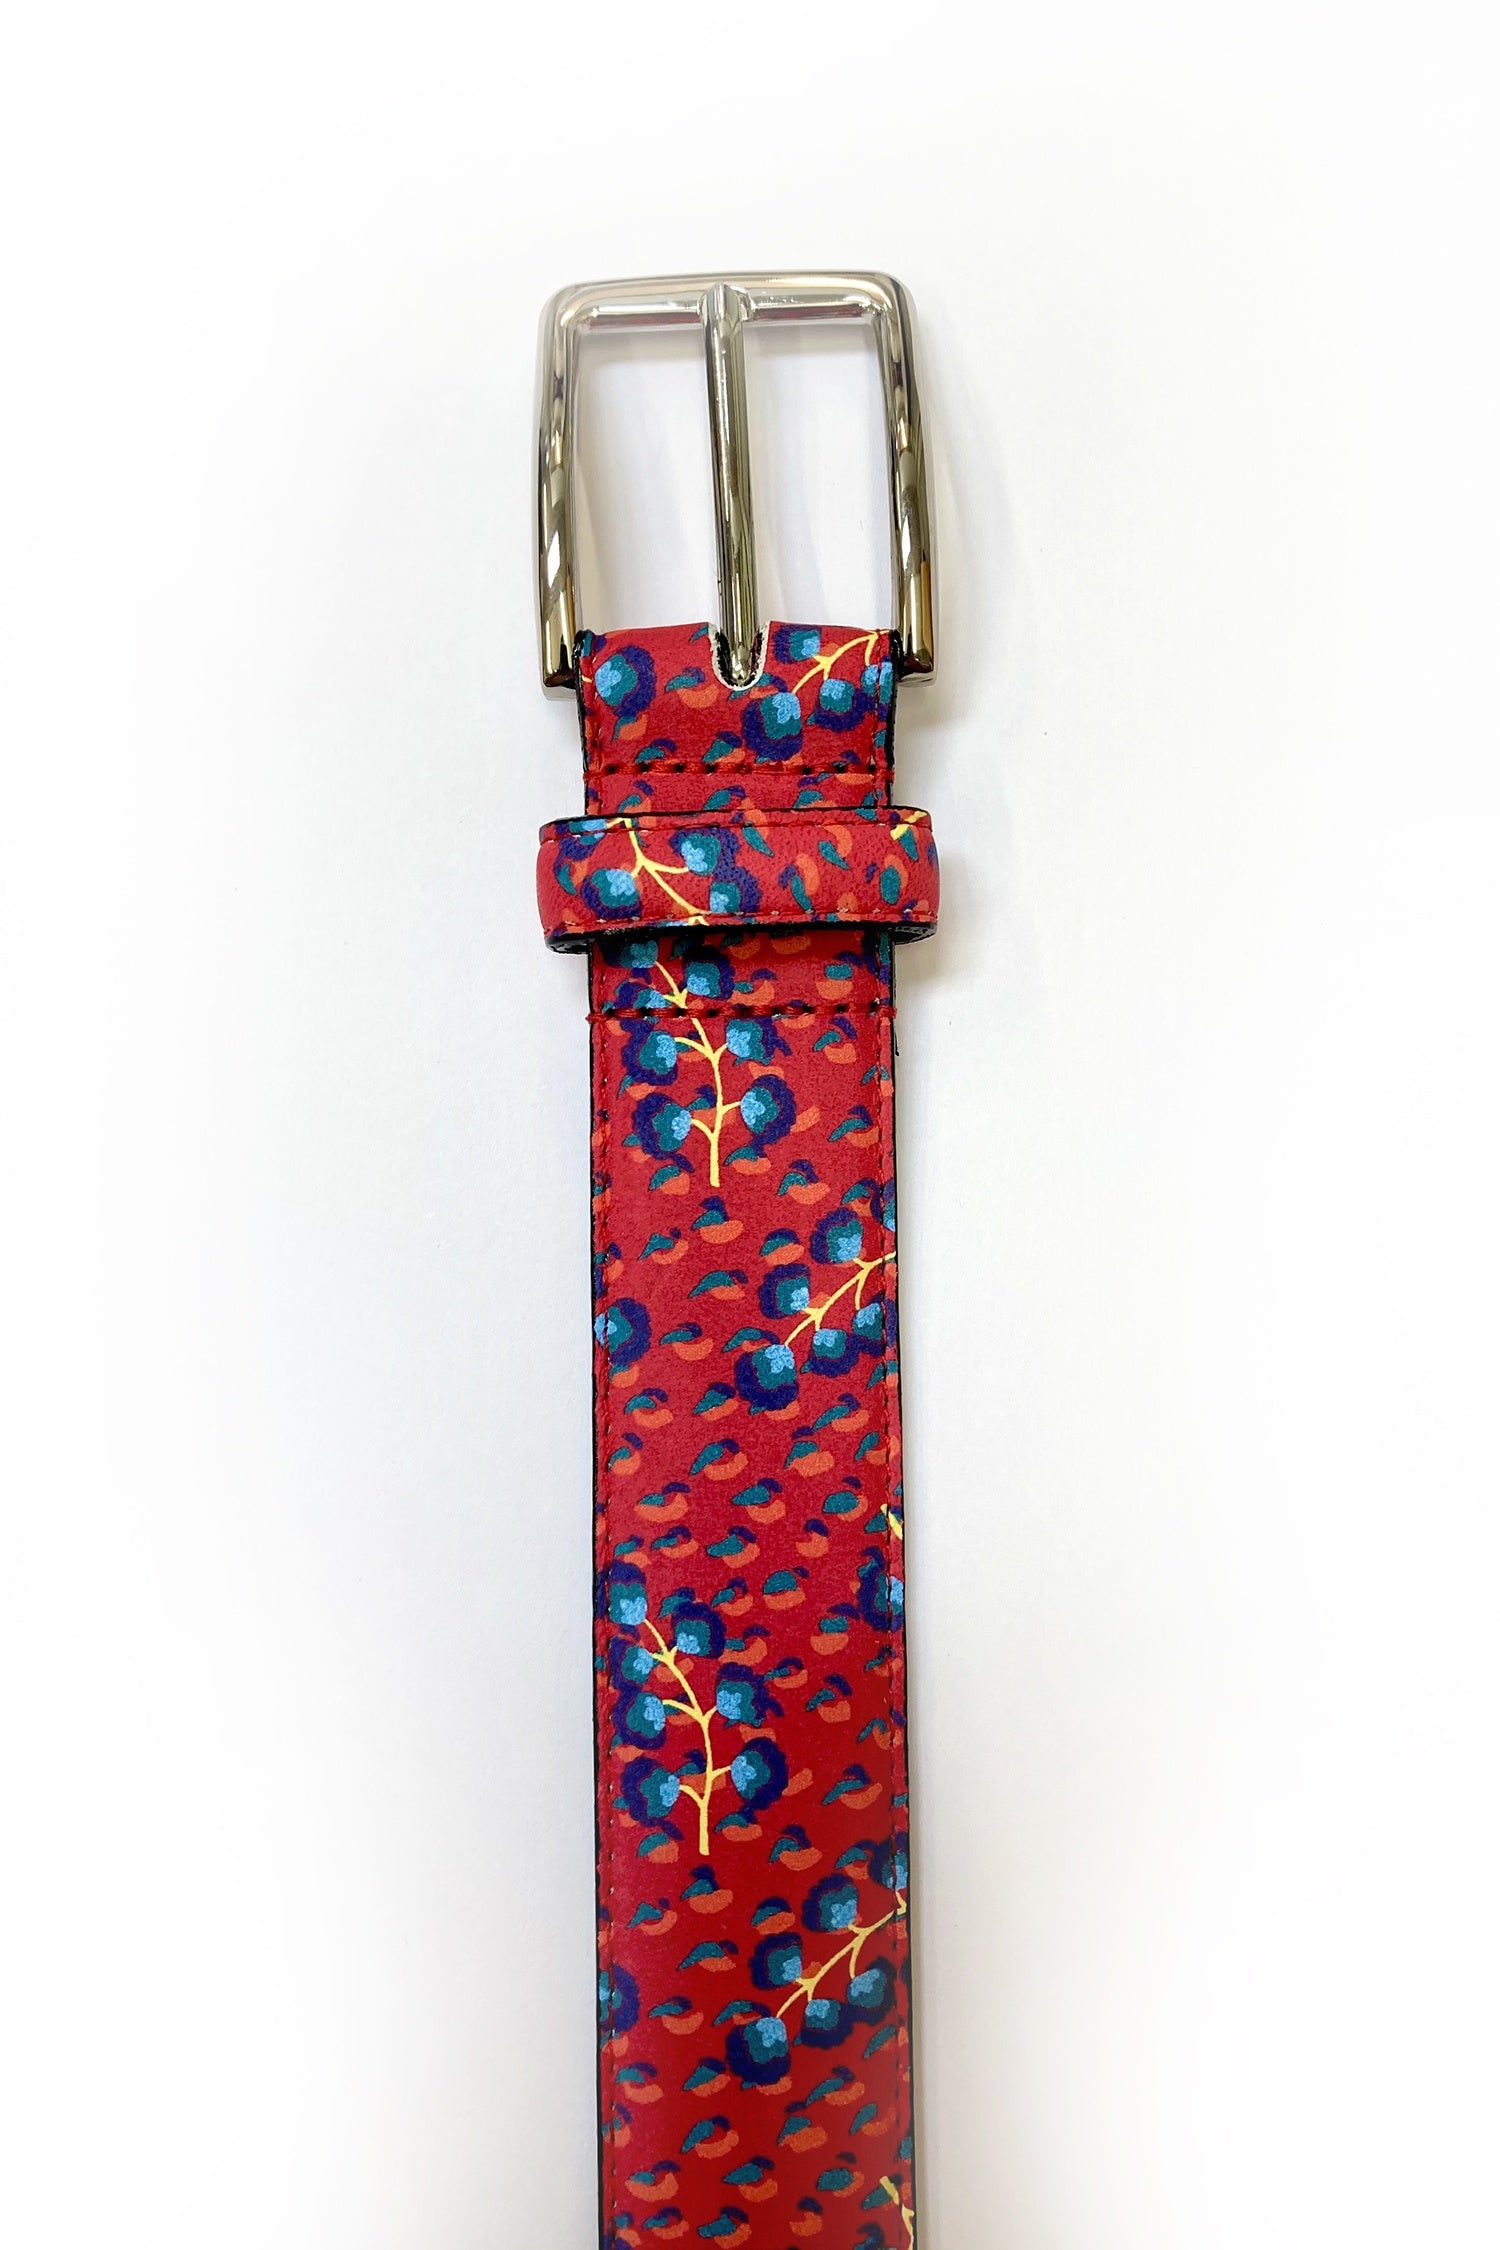 WORLD Liberty Leather Belt - Red Floral